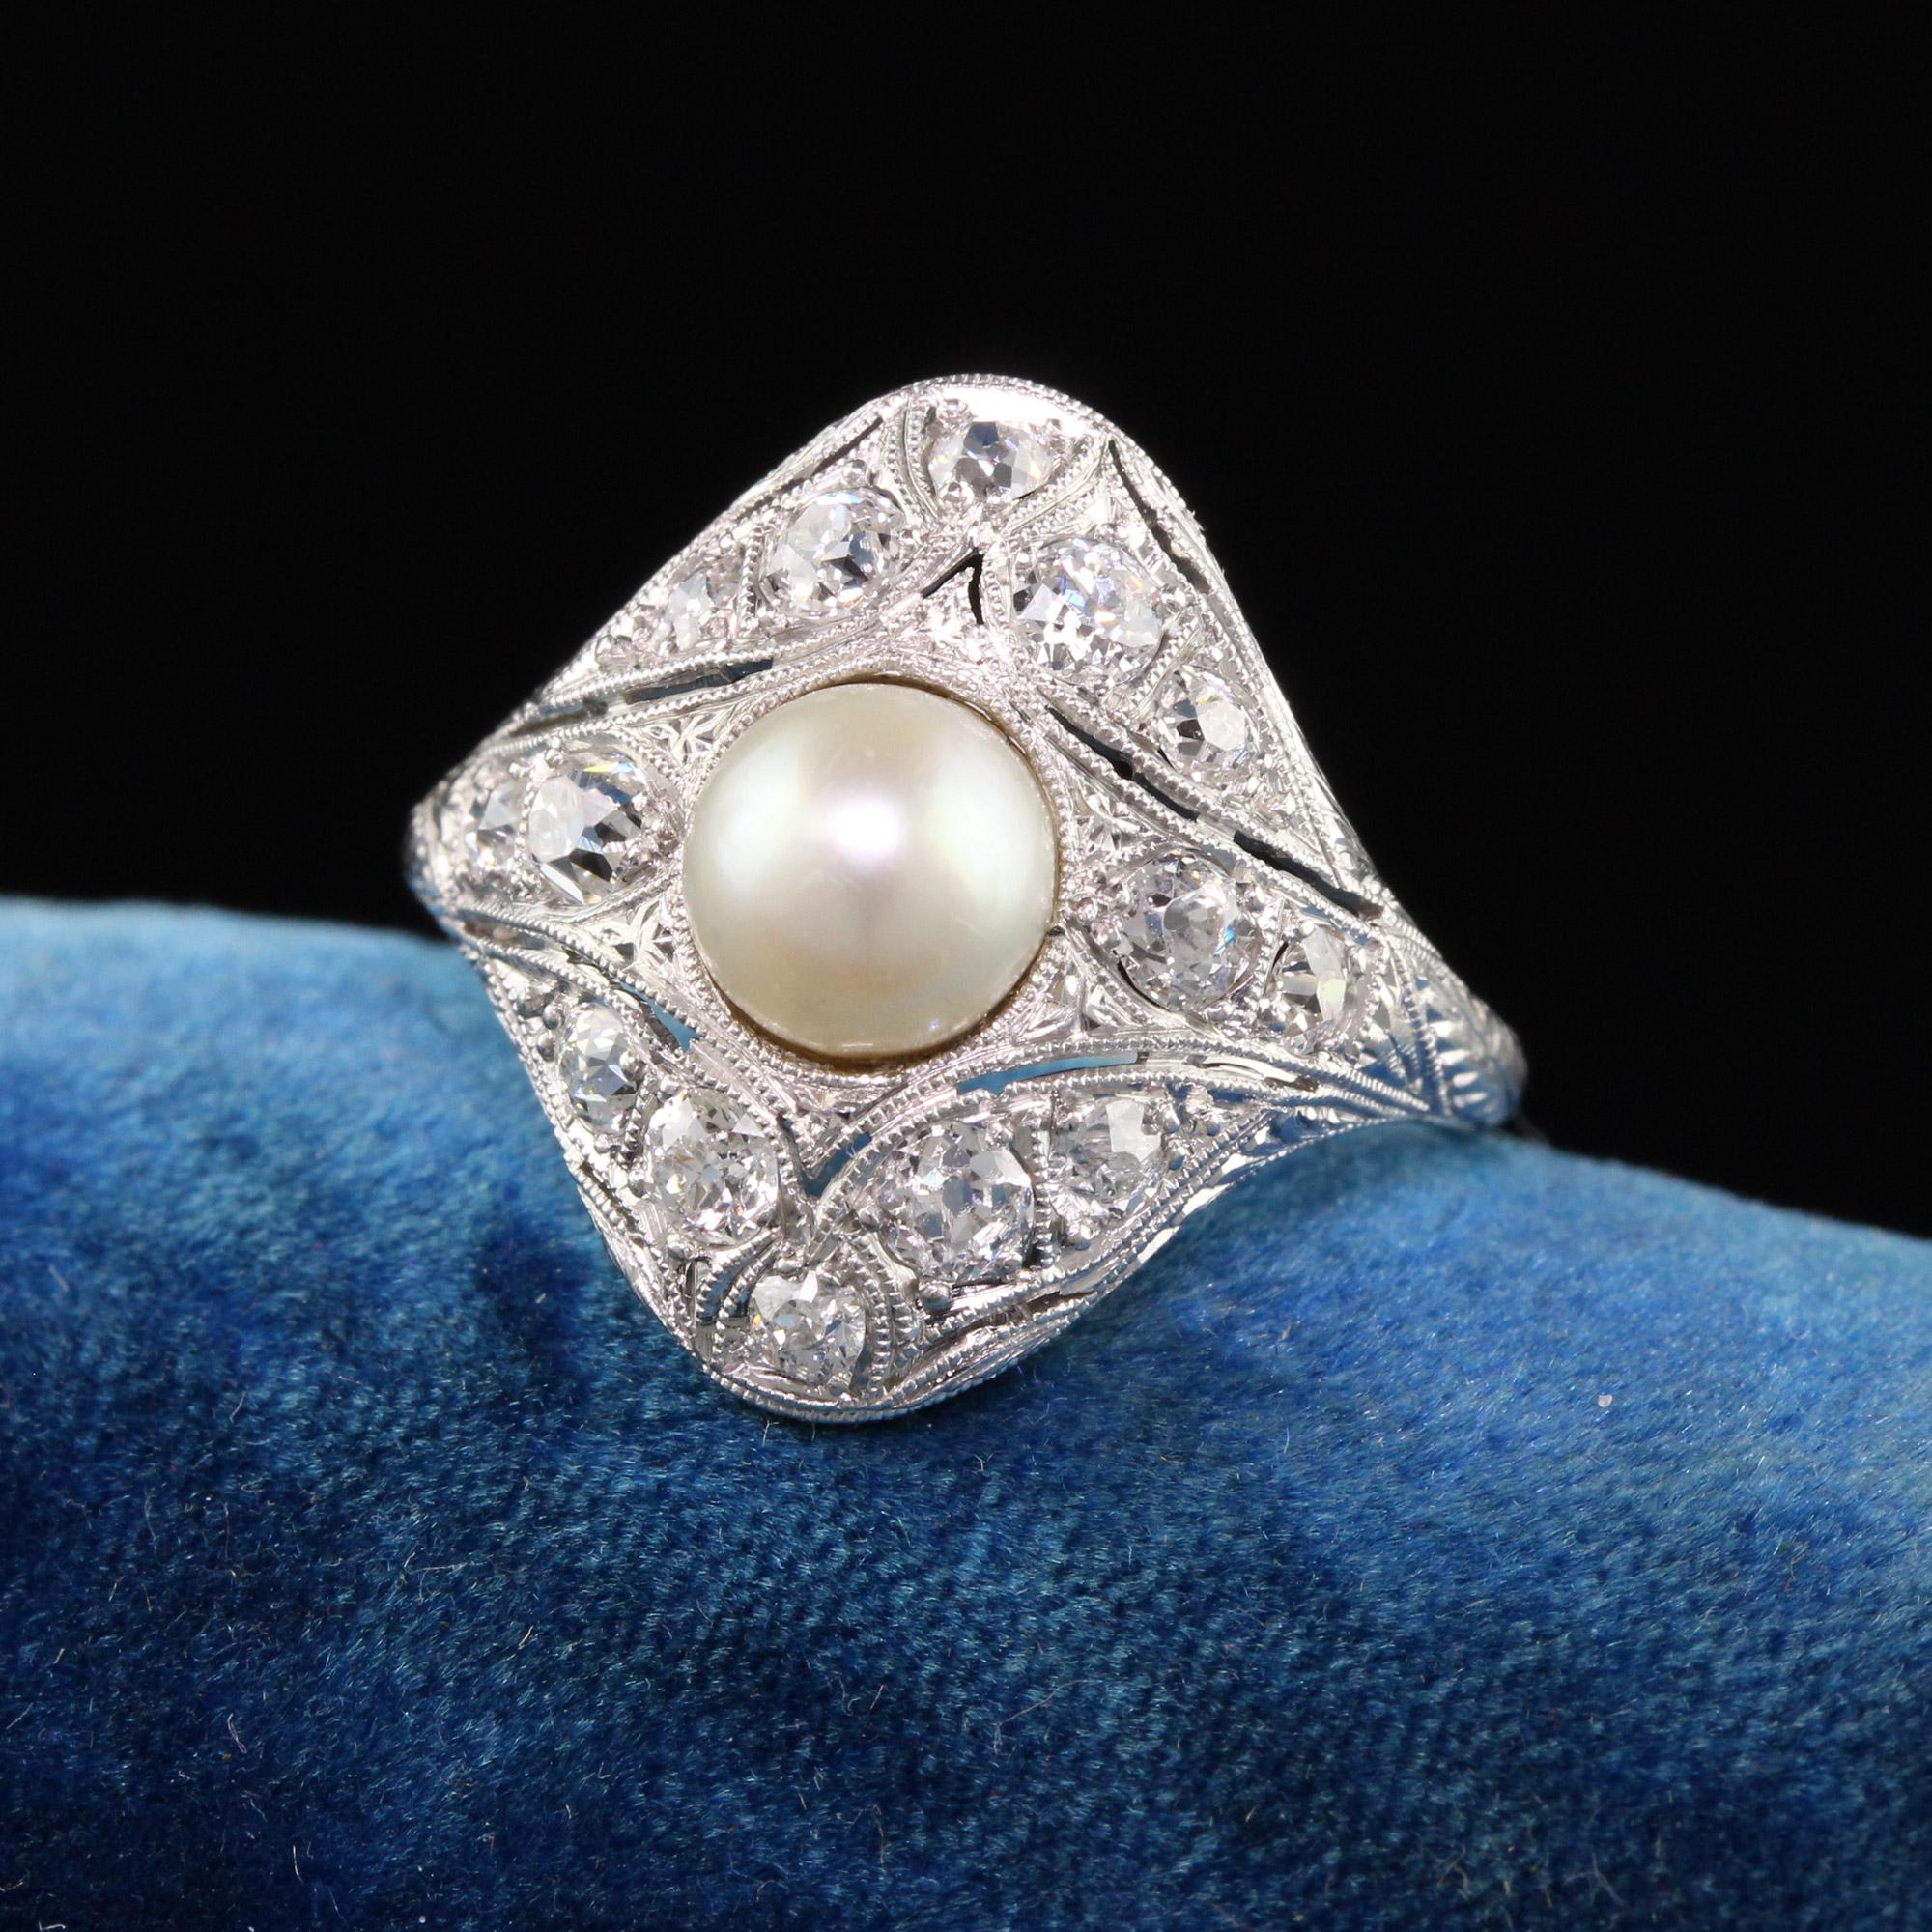 Beautiful Antique Edwardian Platinum Old European Diamond Pearl Engagement Ring. This gorgeous Edwardian ring features old european cut diamonds with amazing milgraining alongside a white pearl in the center that is believed to be natural.

Item